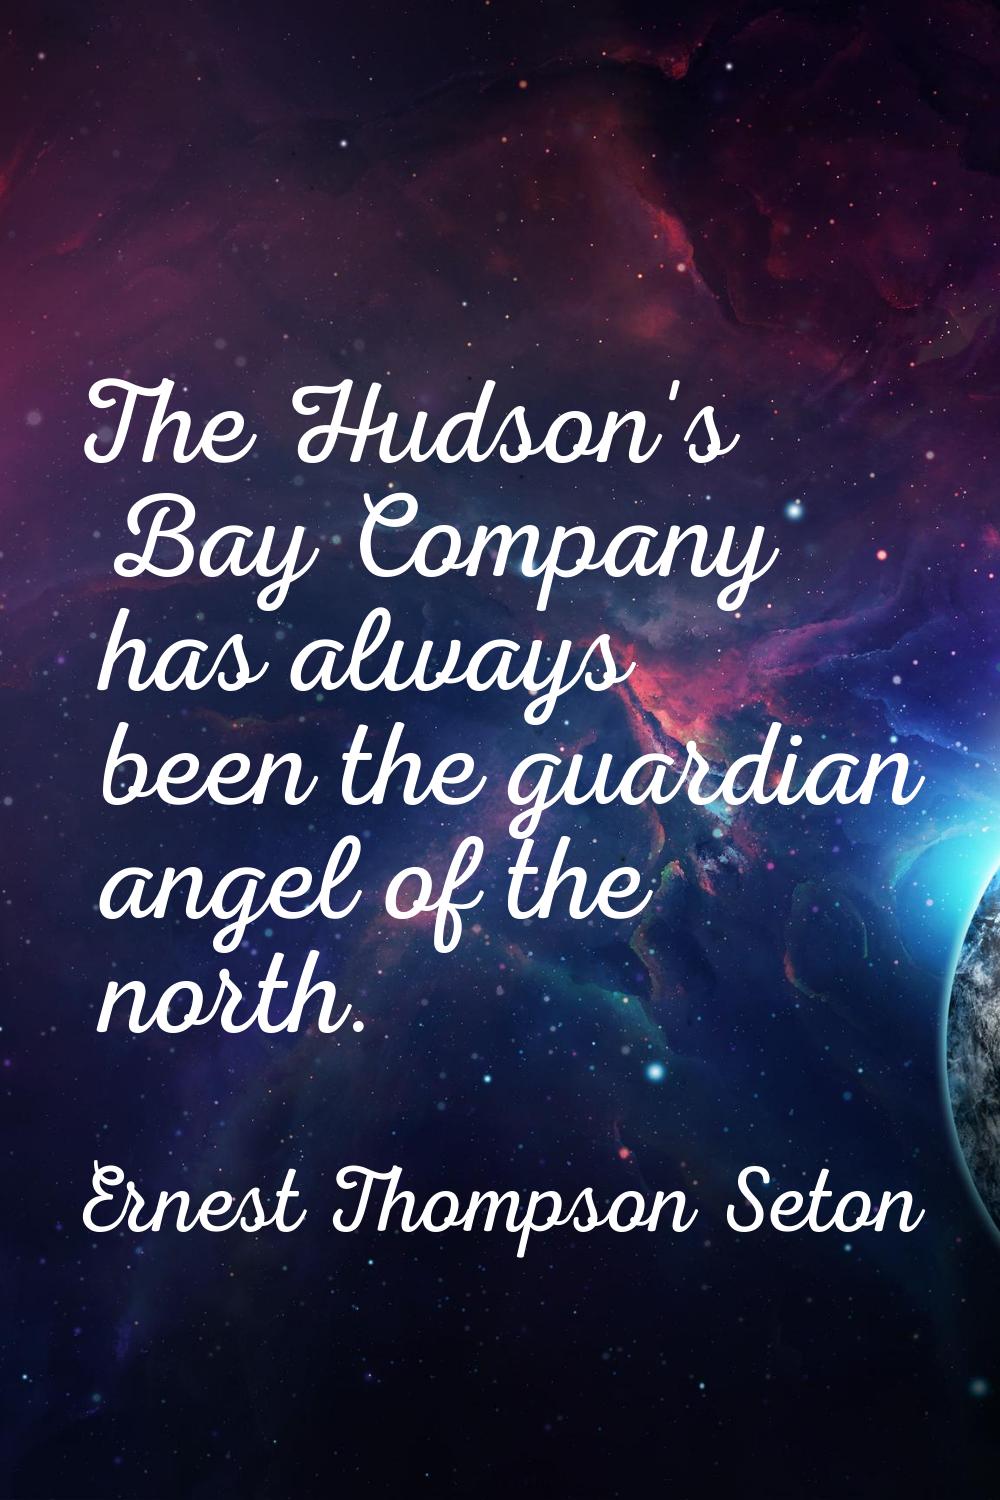 The Hudson's Bay Company has always been the guardian angel of the north.